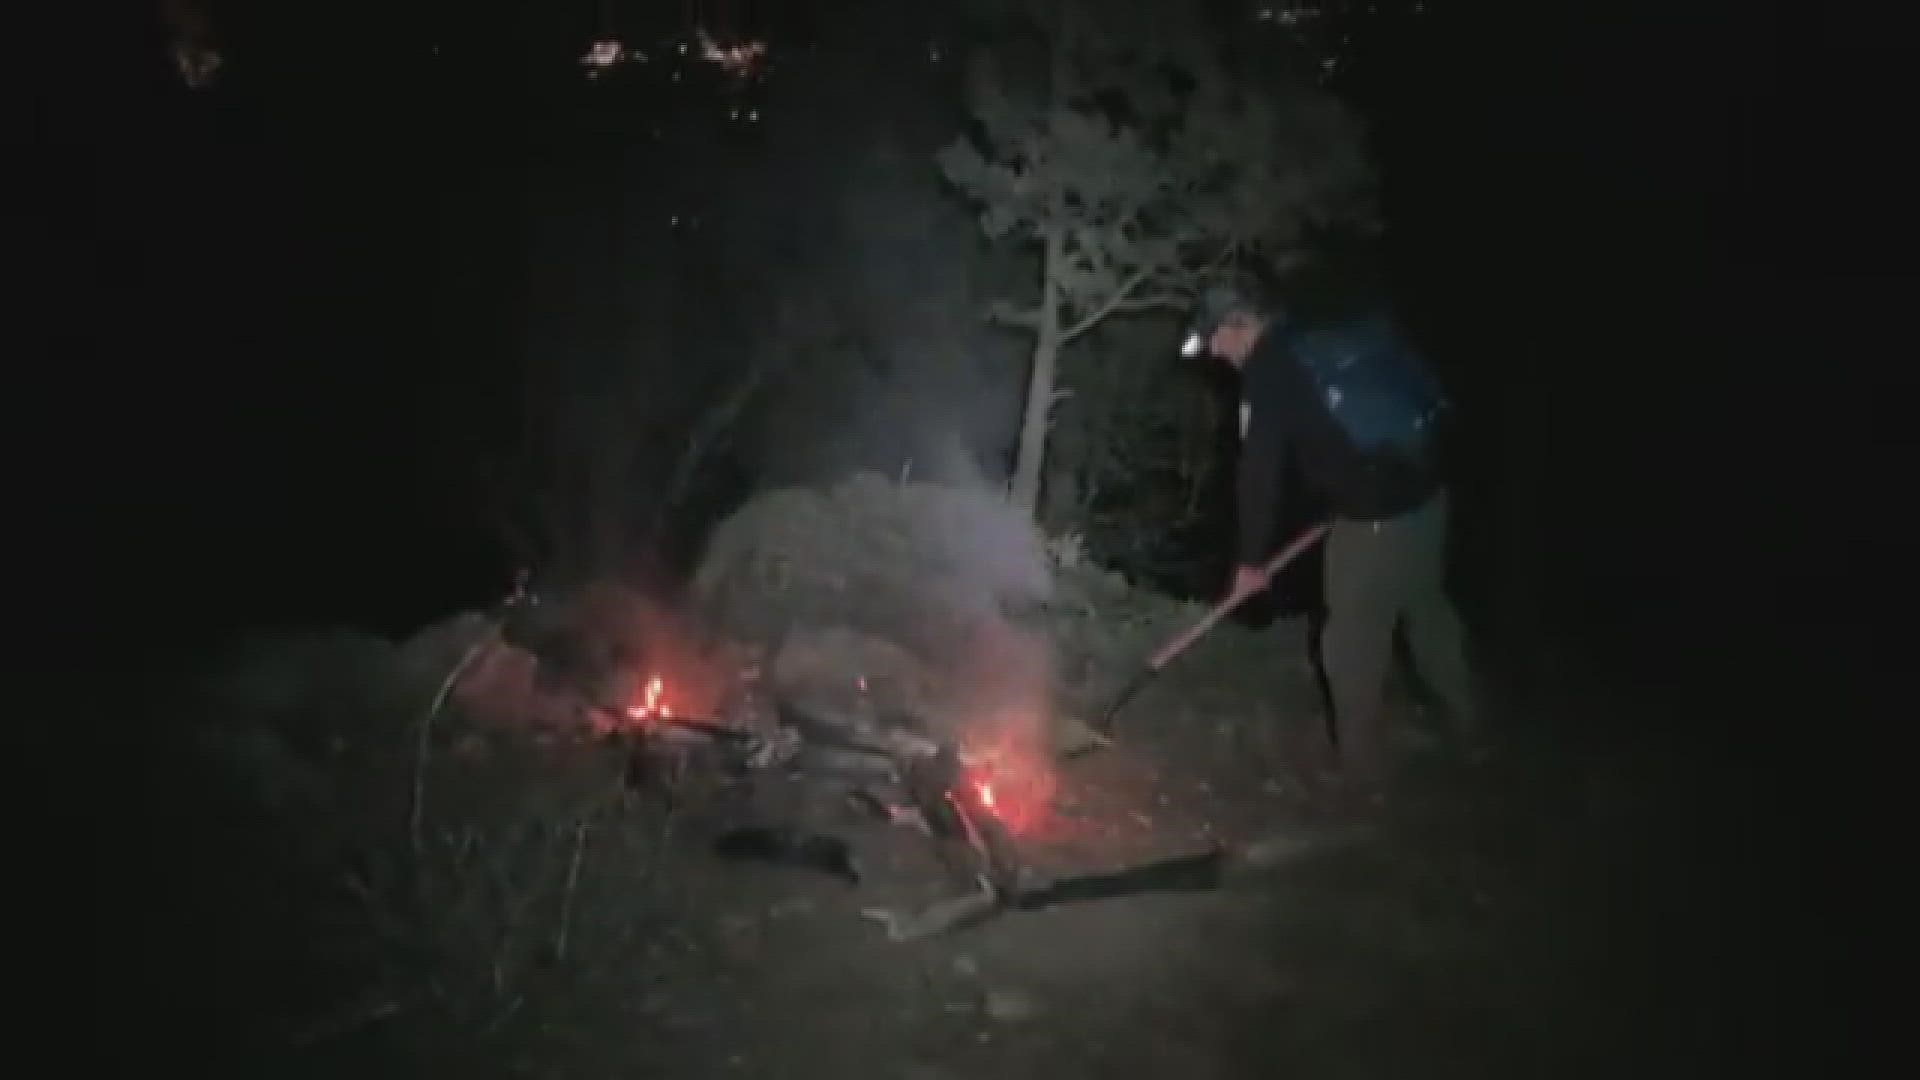 The campers from Florida were contacted by an off duty firefighter but left before being contacted by park rangers, a spokesperson for JeffCo Open Space said.